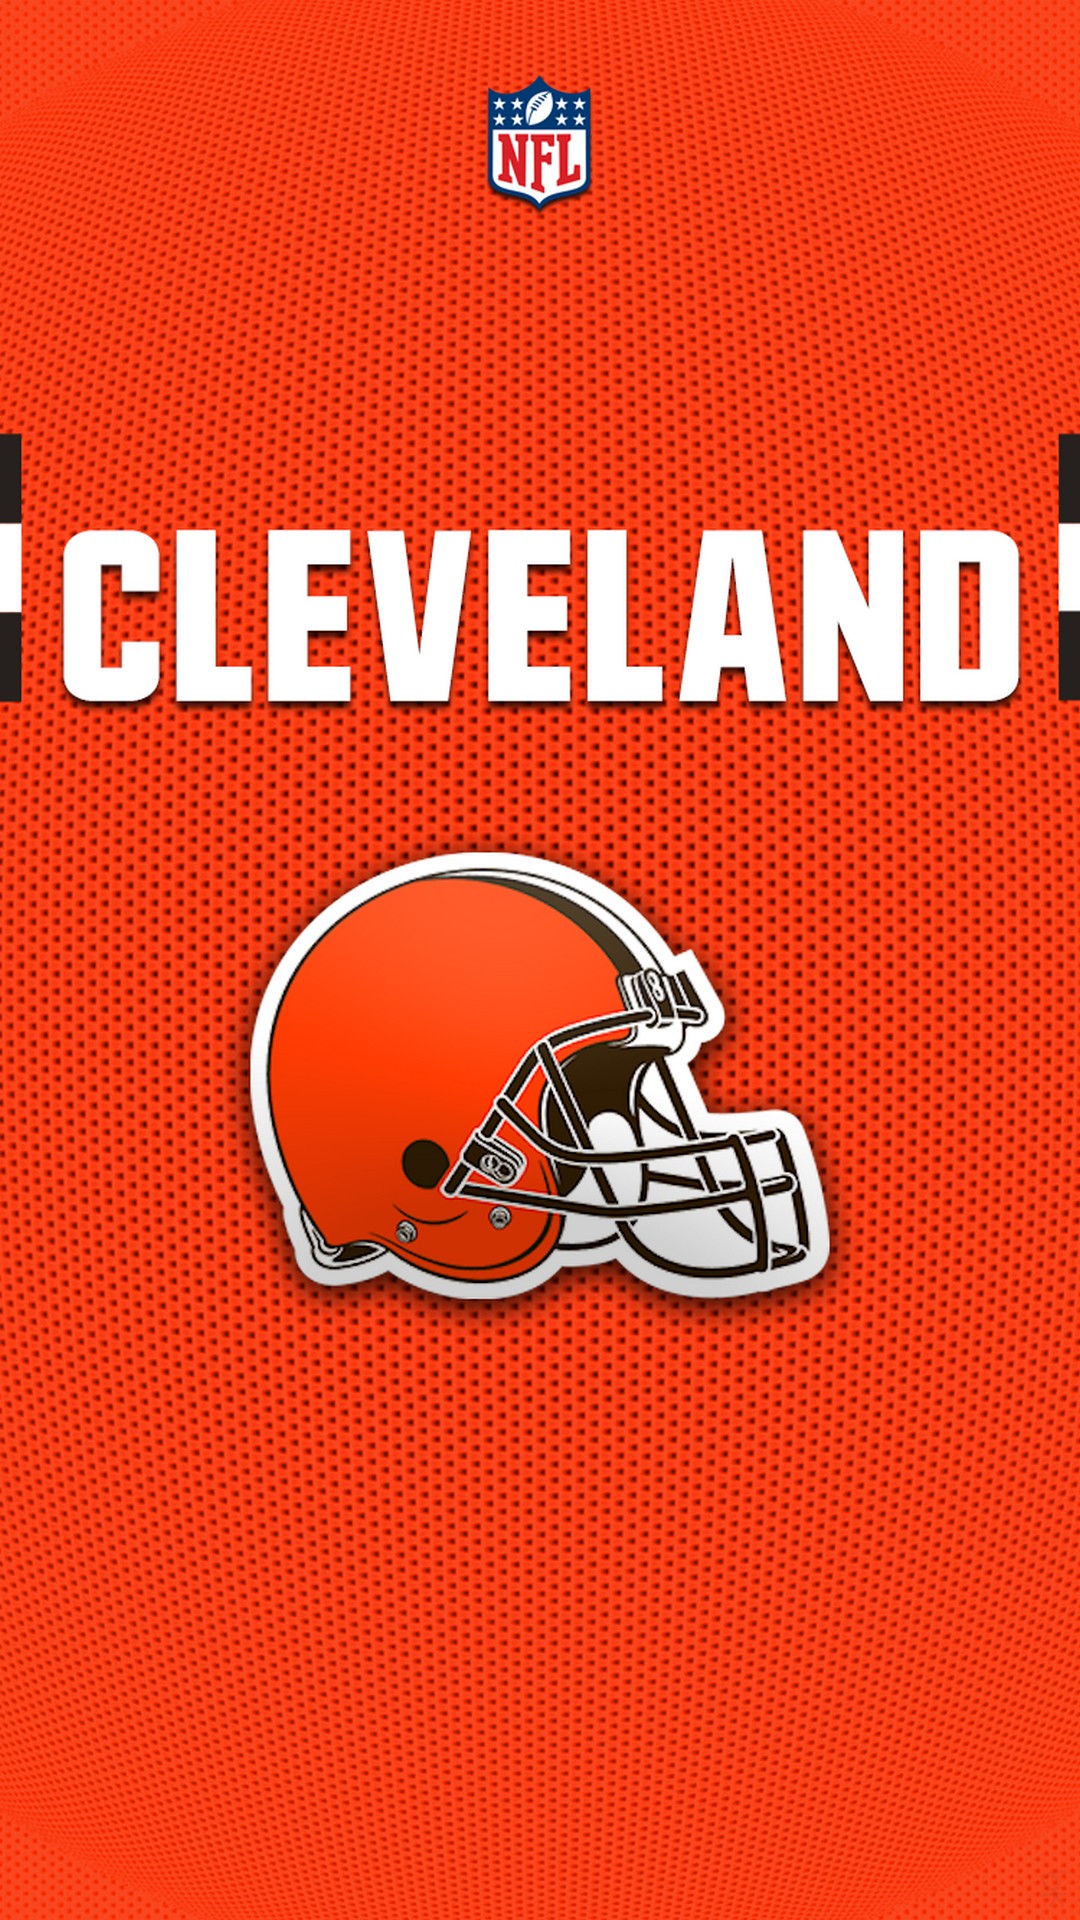 Cleveland Browns iPhone XS Wallpaper with high-resolution 1080x1920 pixel. Download and set as wallpaper for Apple iPhone X, XS Max, XR, 8, 7, 6, SE, iPad, Android